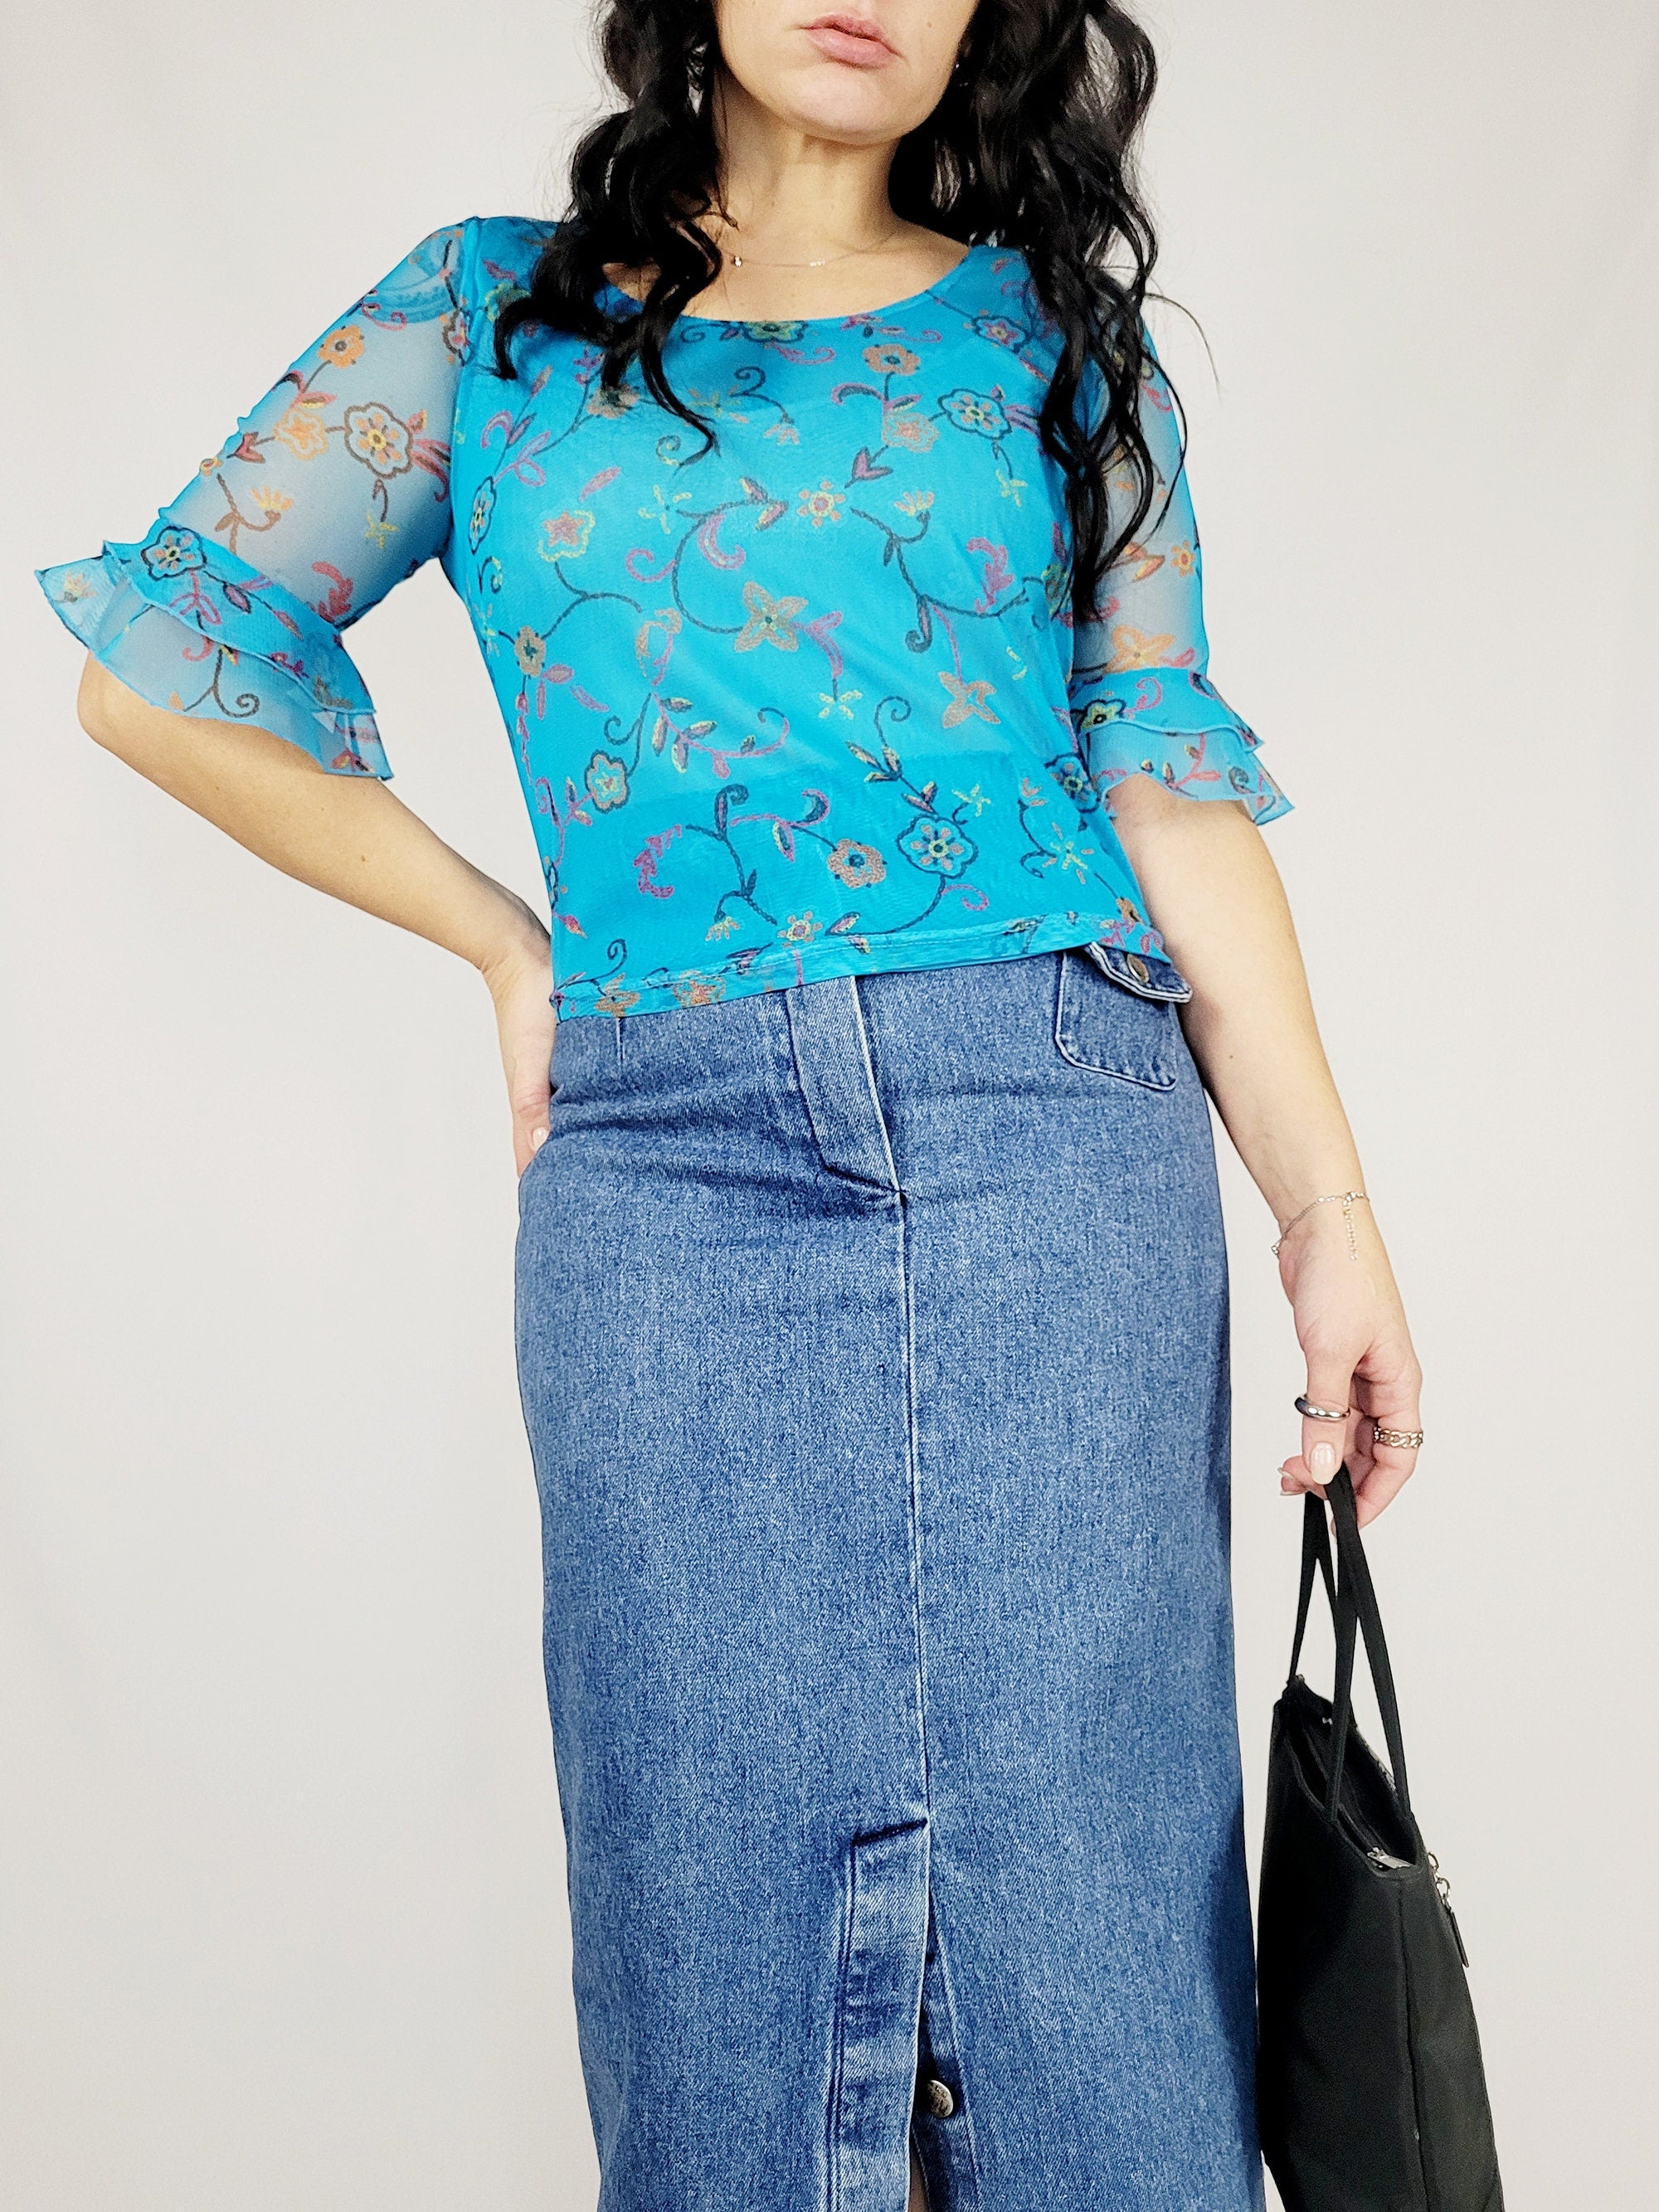 Y2K 00s retro mesh blue floral flare sleeve blouse top